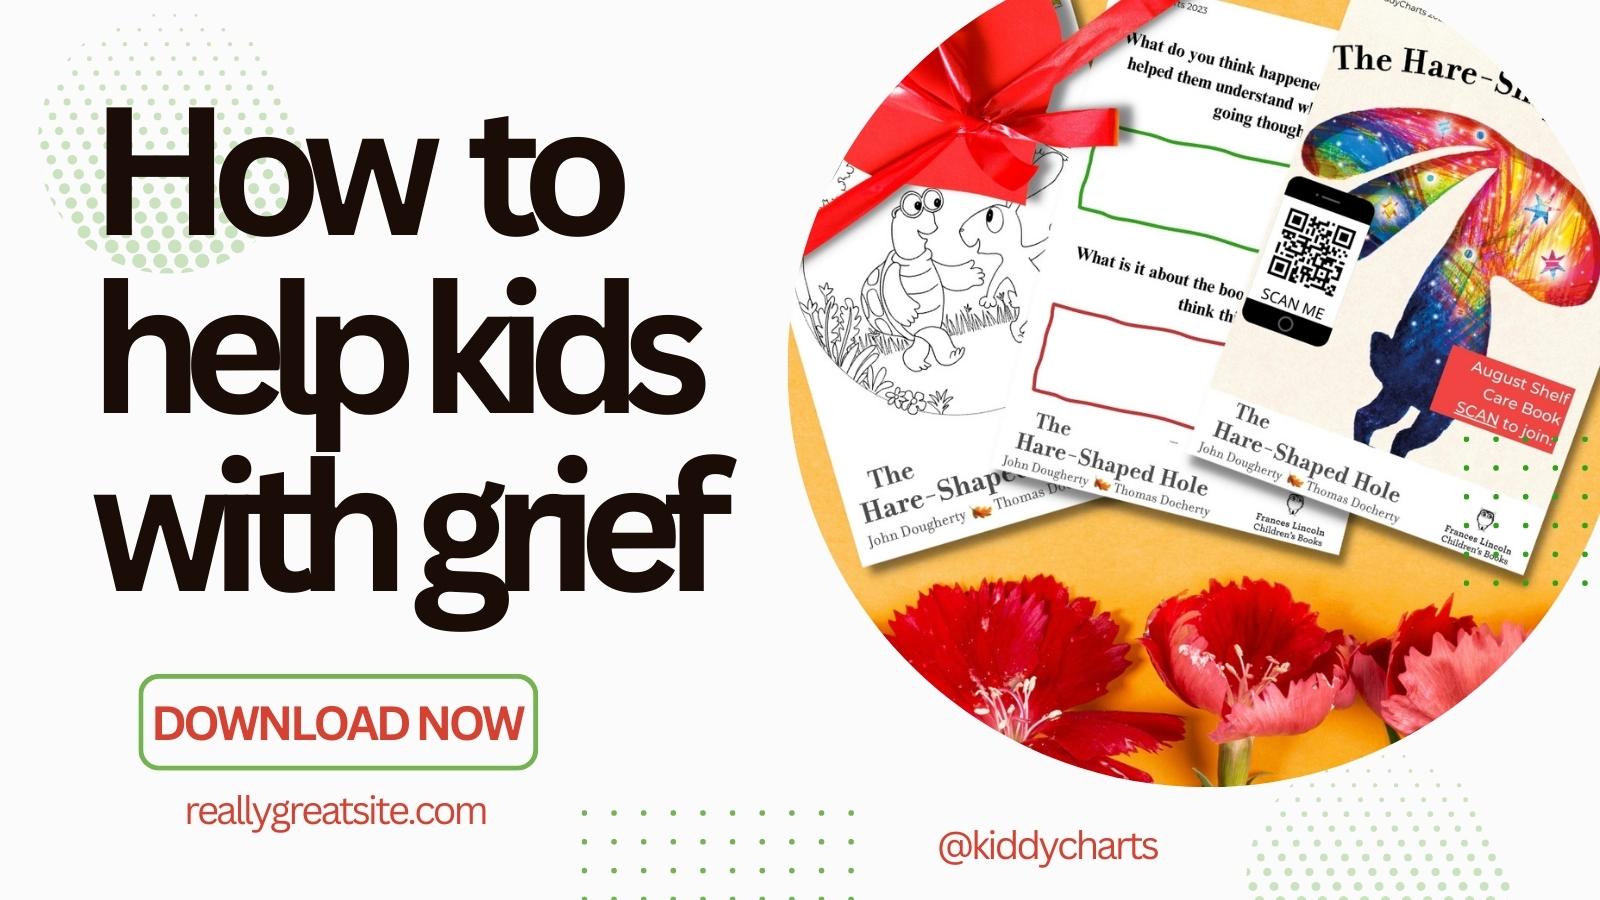 Navigating loss with The Hare-Shaped Hole: Introducing grief worksheets for kids